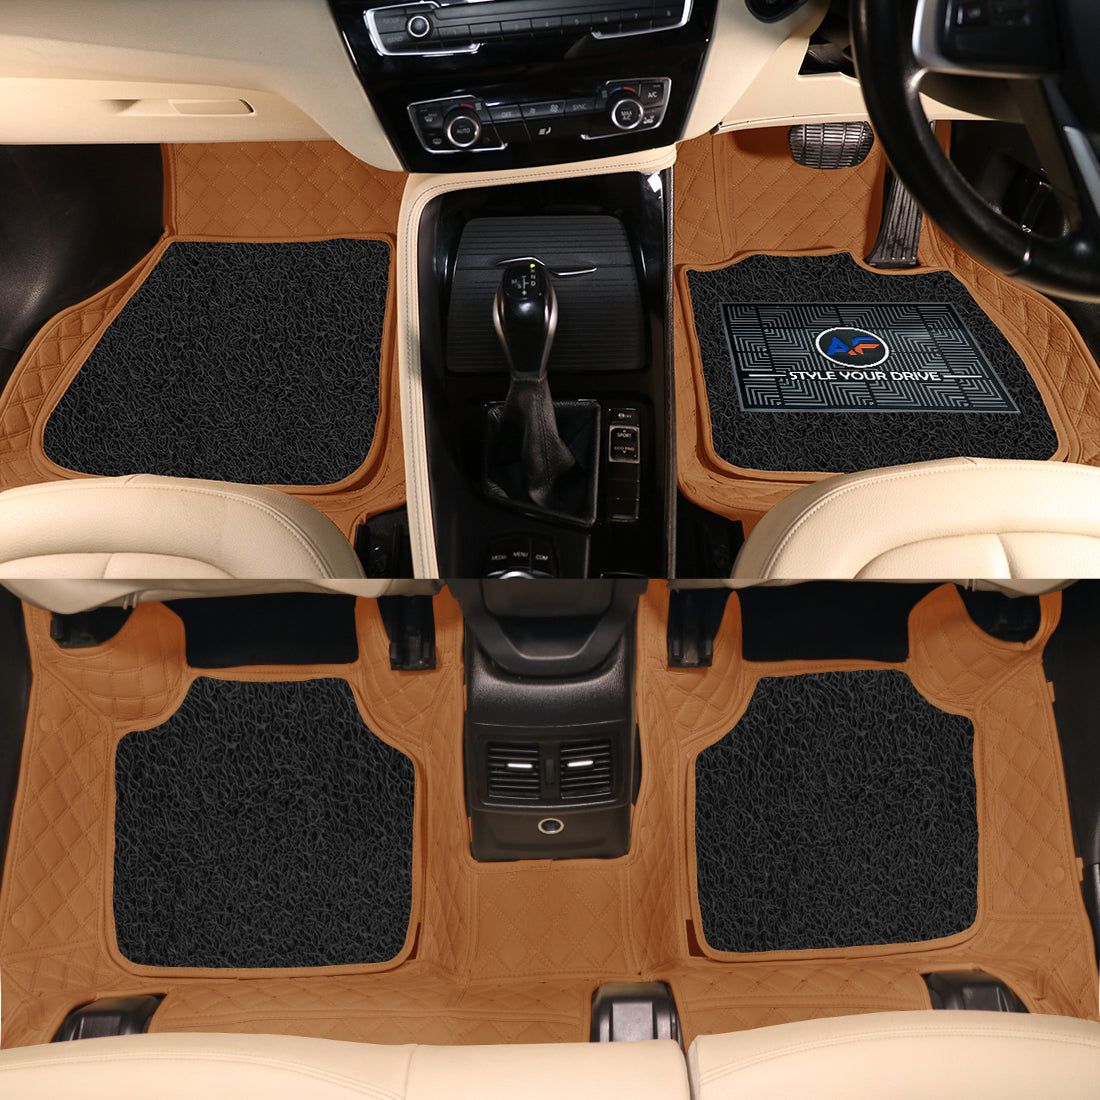 Audi Q7 2010 7D Luxury Car Mat, All Weather Proof, Anti-Skid, 100% Waterproof & Odorless with Unique Diamond Fish Design (24mm Luxury PU Leather, 2 Rows)